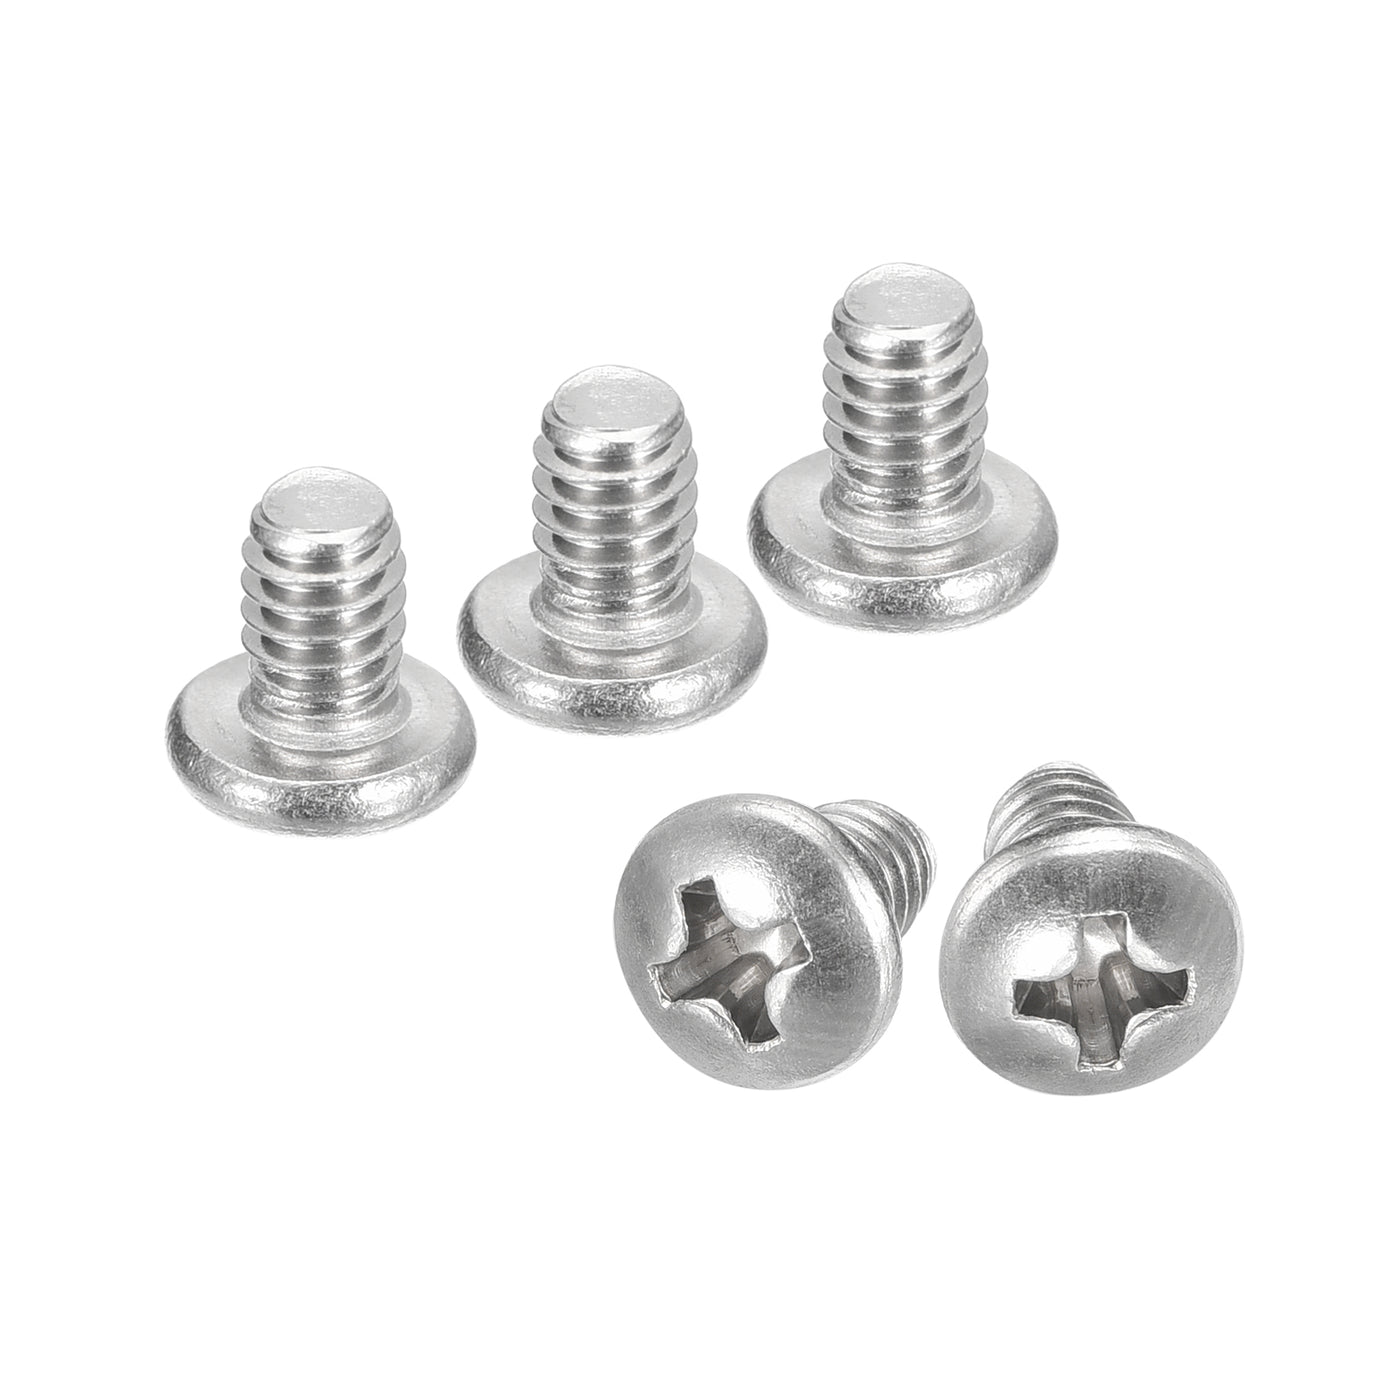 uxcell Uxcell #8-32x1/4" Pan Head Machine Screws, Stainless Steel 18-8 Screw, Pack of 50